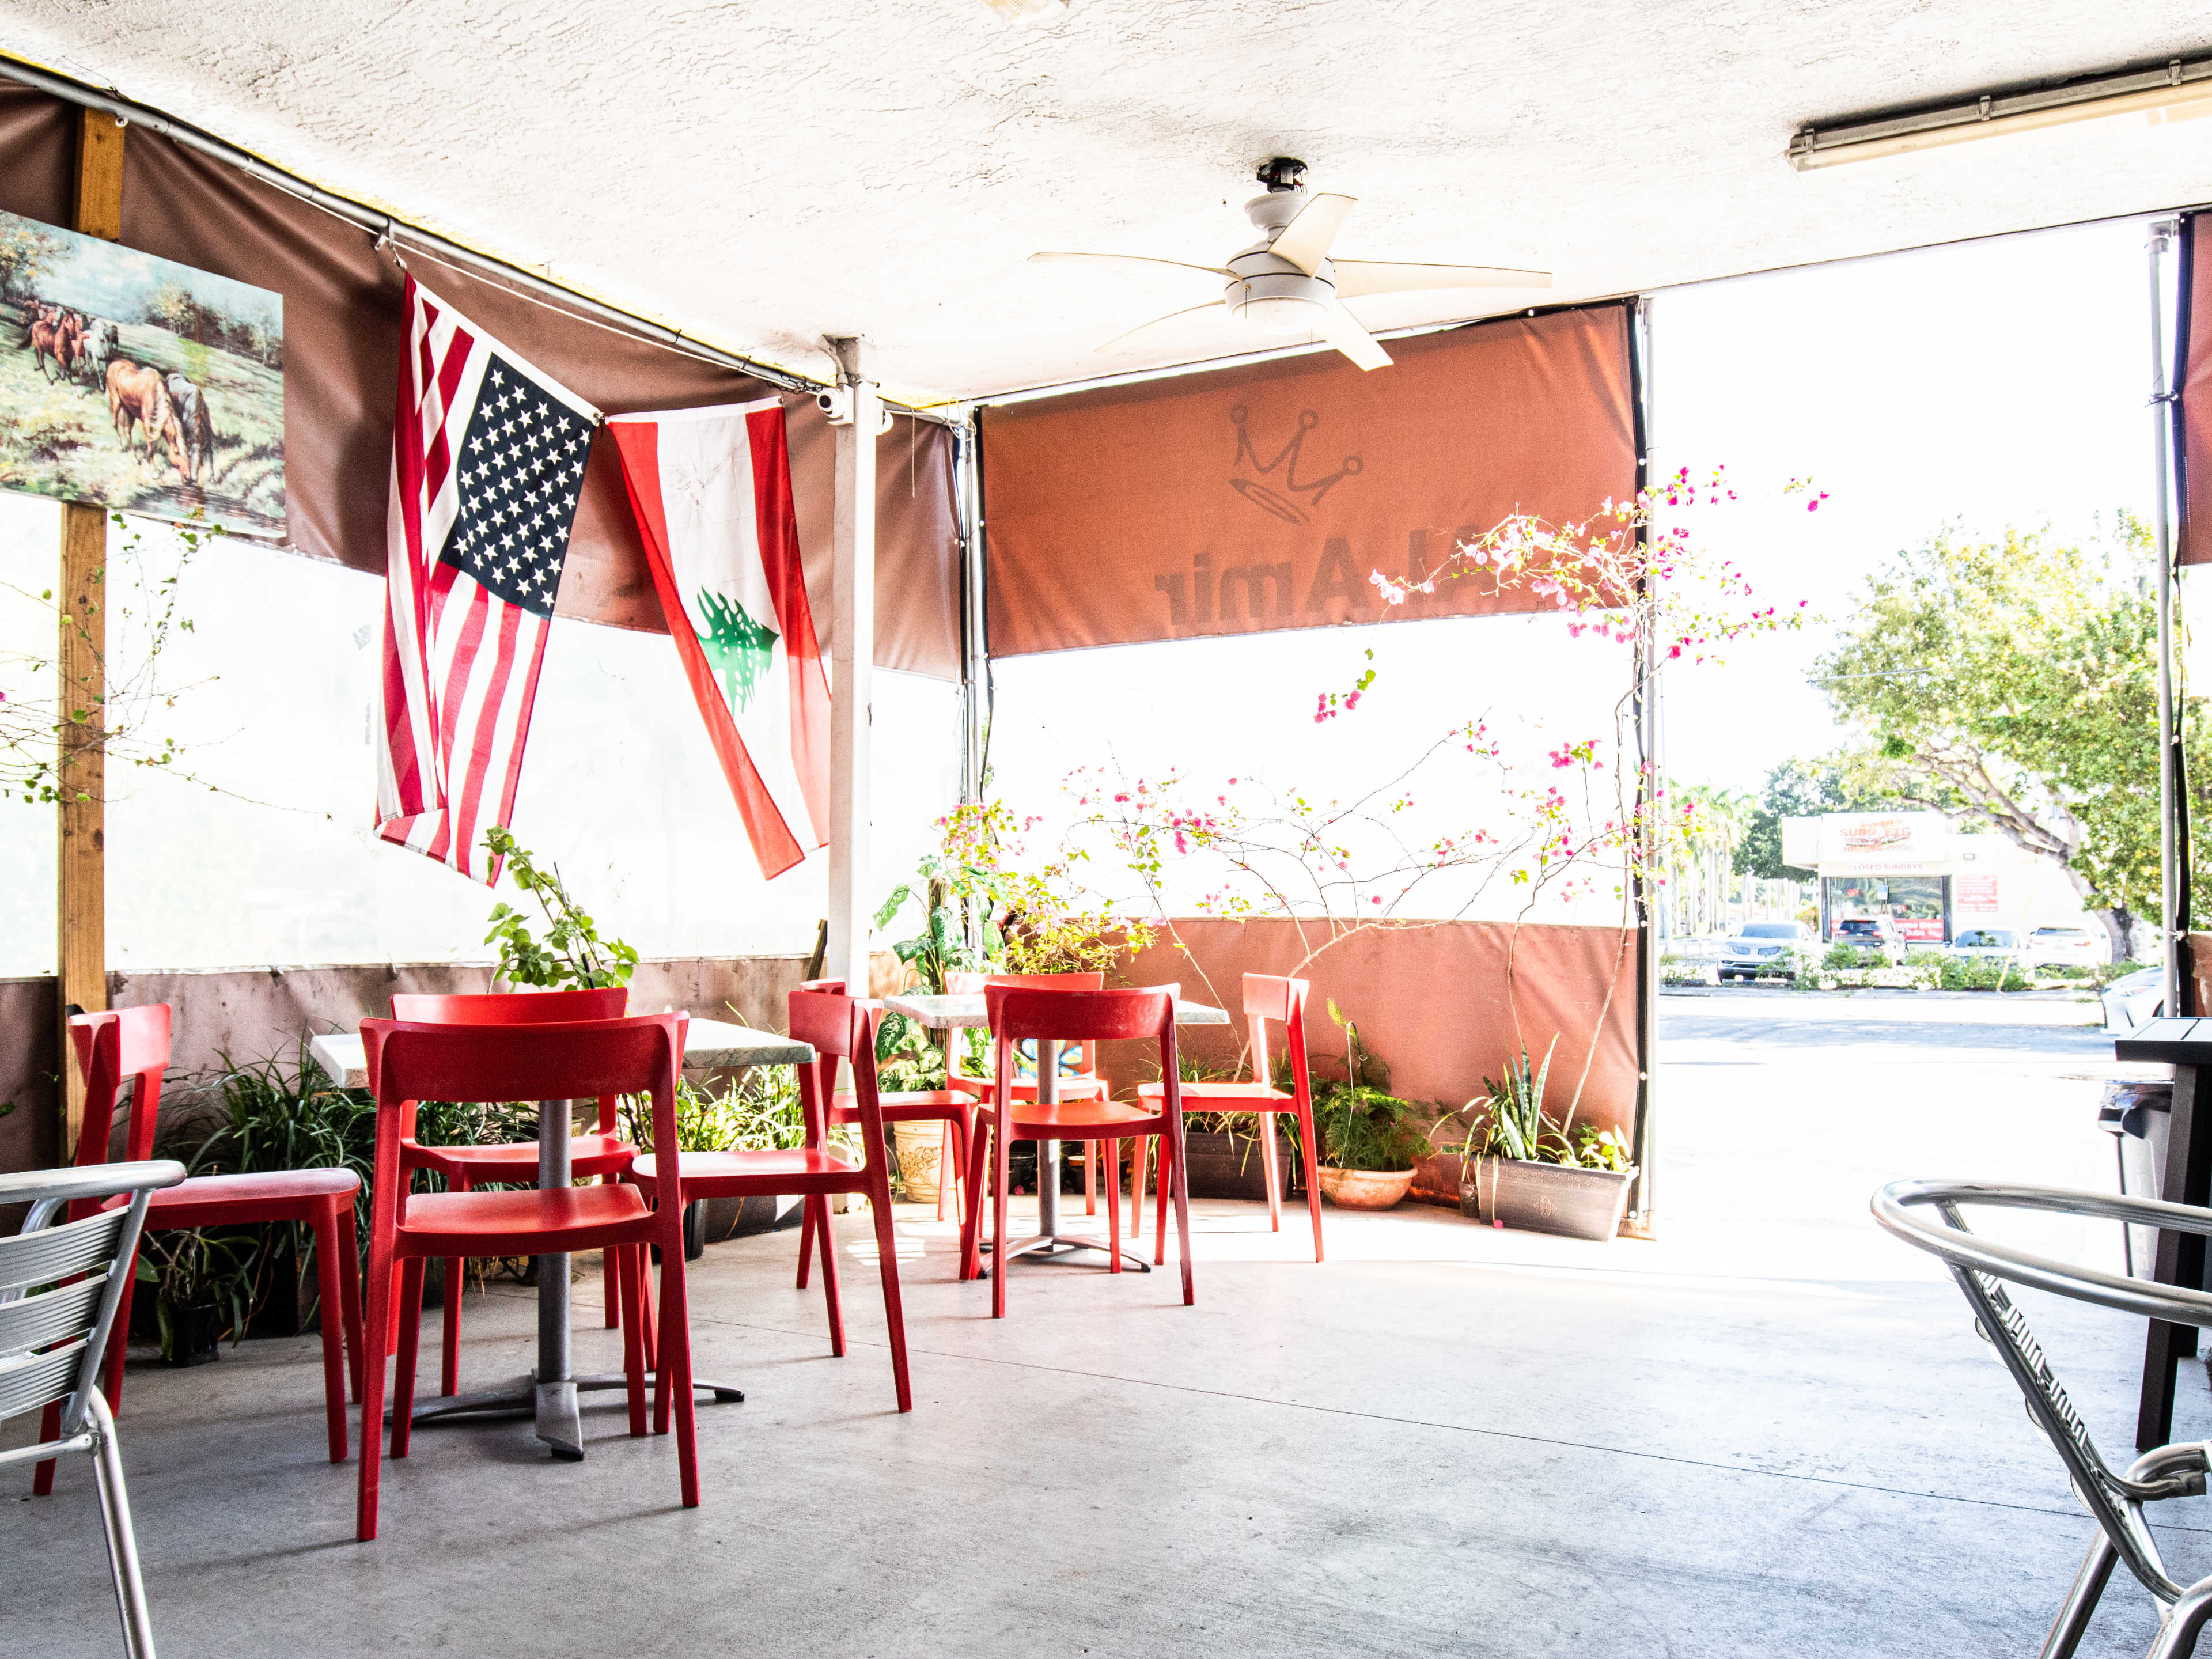 covered outdoor tent patio with flags, tables, and chairs, looking out onto tree-lined street